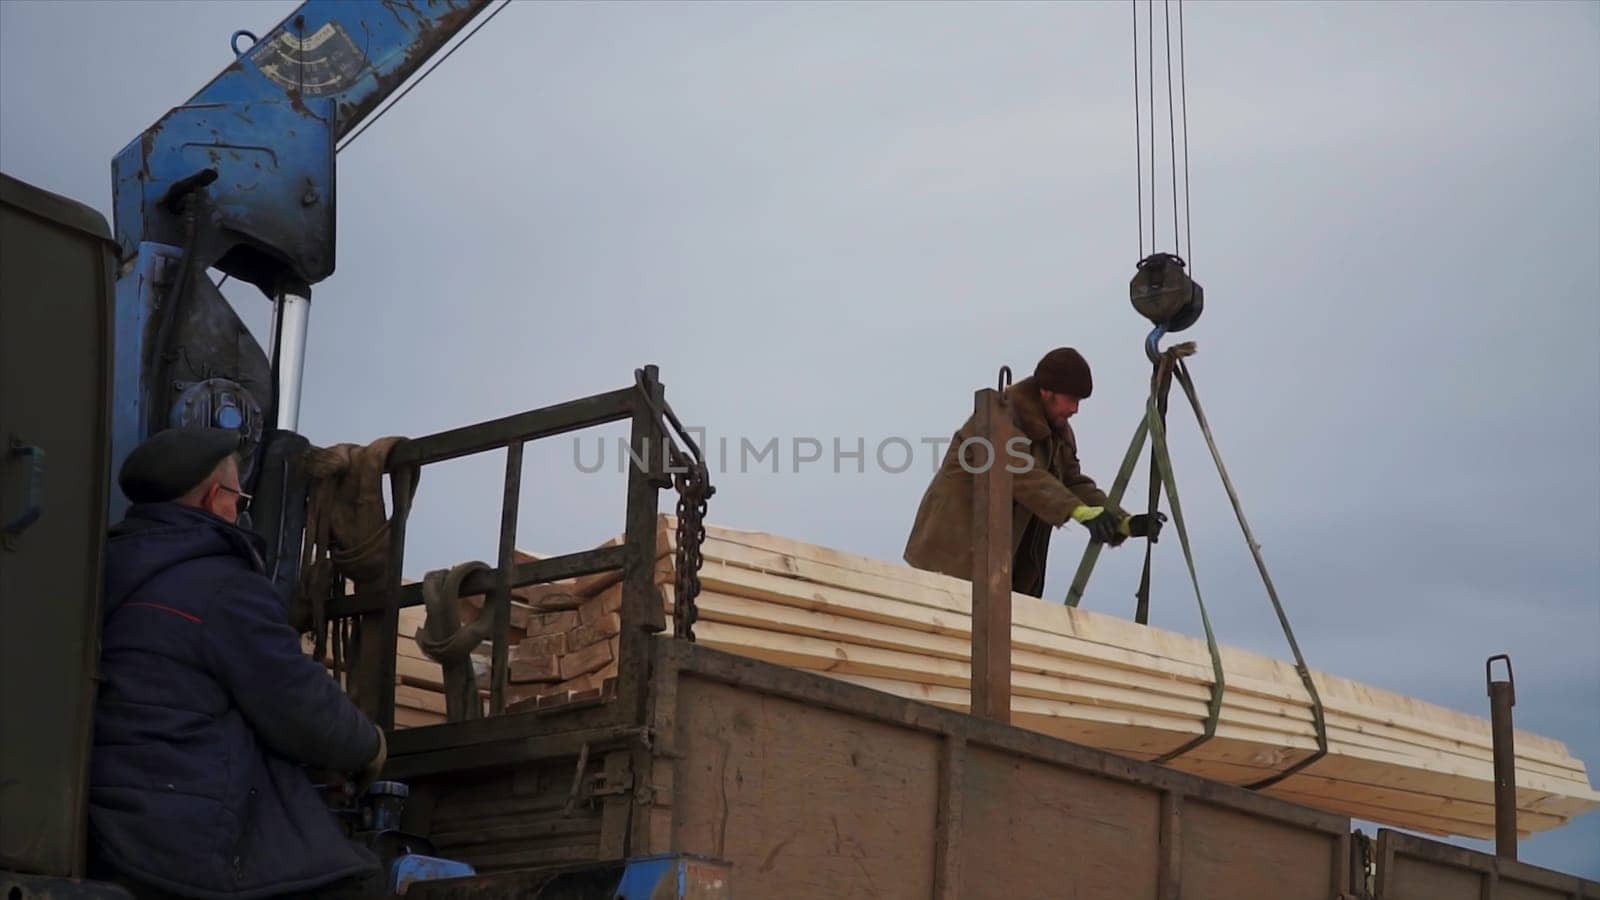 Men unload crane with wood. Clip. Workers unloading wood with crane. Crane with wooden beams is lowered into truck with worker by Mediawhalestock